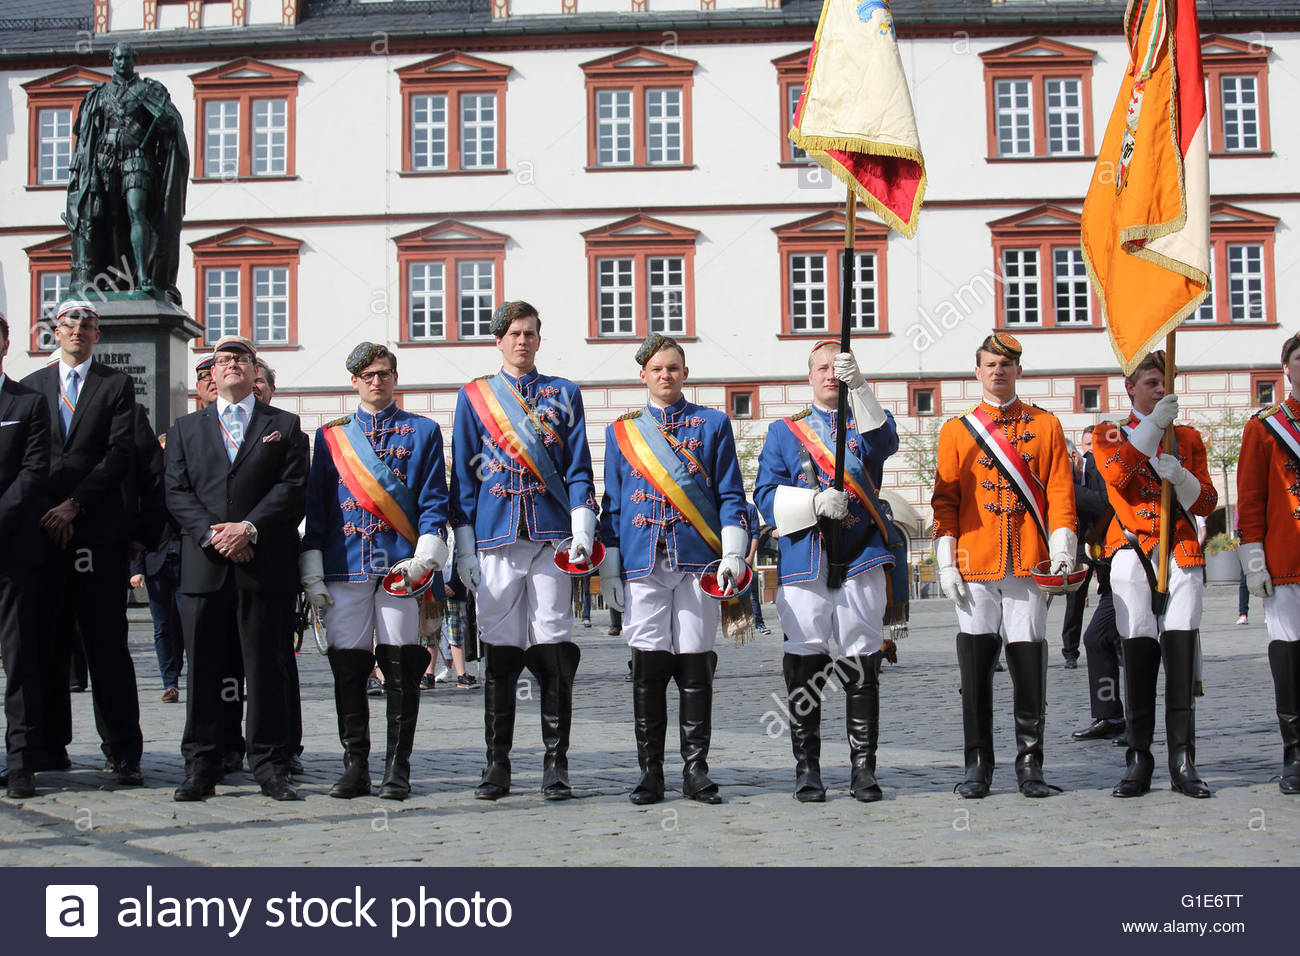 Coburg, Germany. 13th May, 2016. The annual Coburg Convent weekend has begun with a parade through the town. Each Whitsun student associations gather in Coburg in Bavaria to celebrate the tradition of young students' associations which today encompasses about 100 separate organisations and has an overall membership of around 10,000 members. Credit:  reallifephotos/Alamy Live News Stock Photo